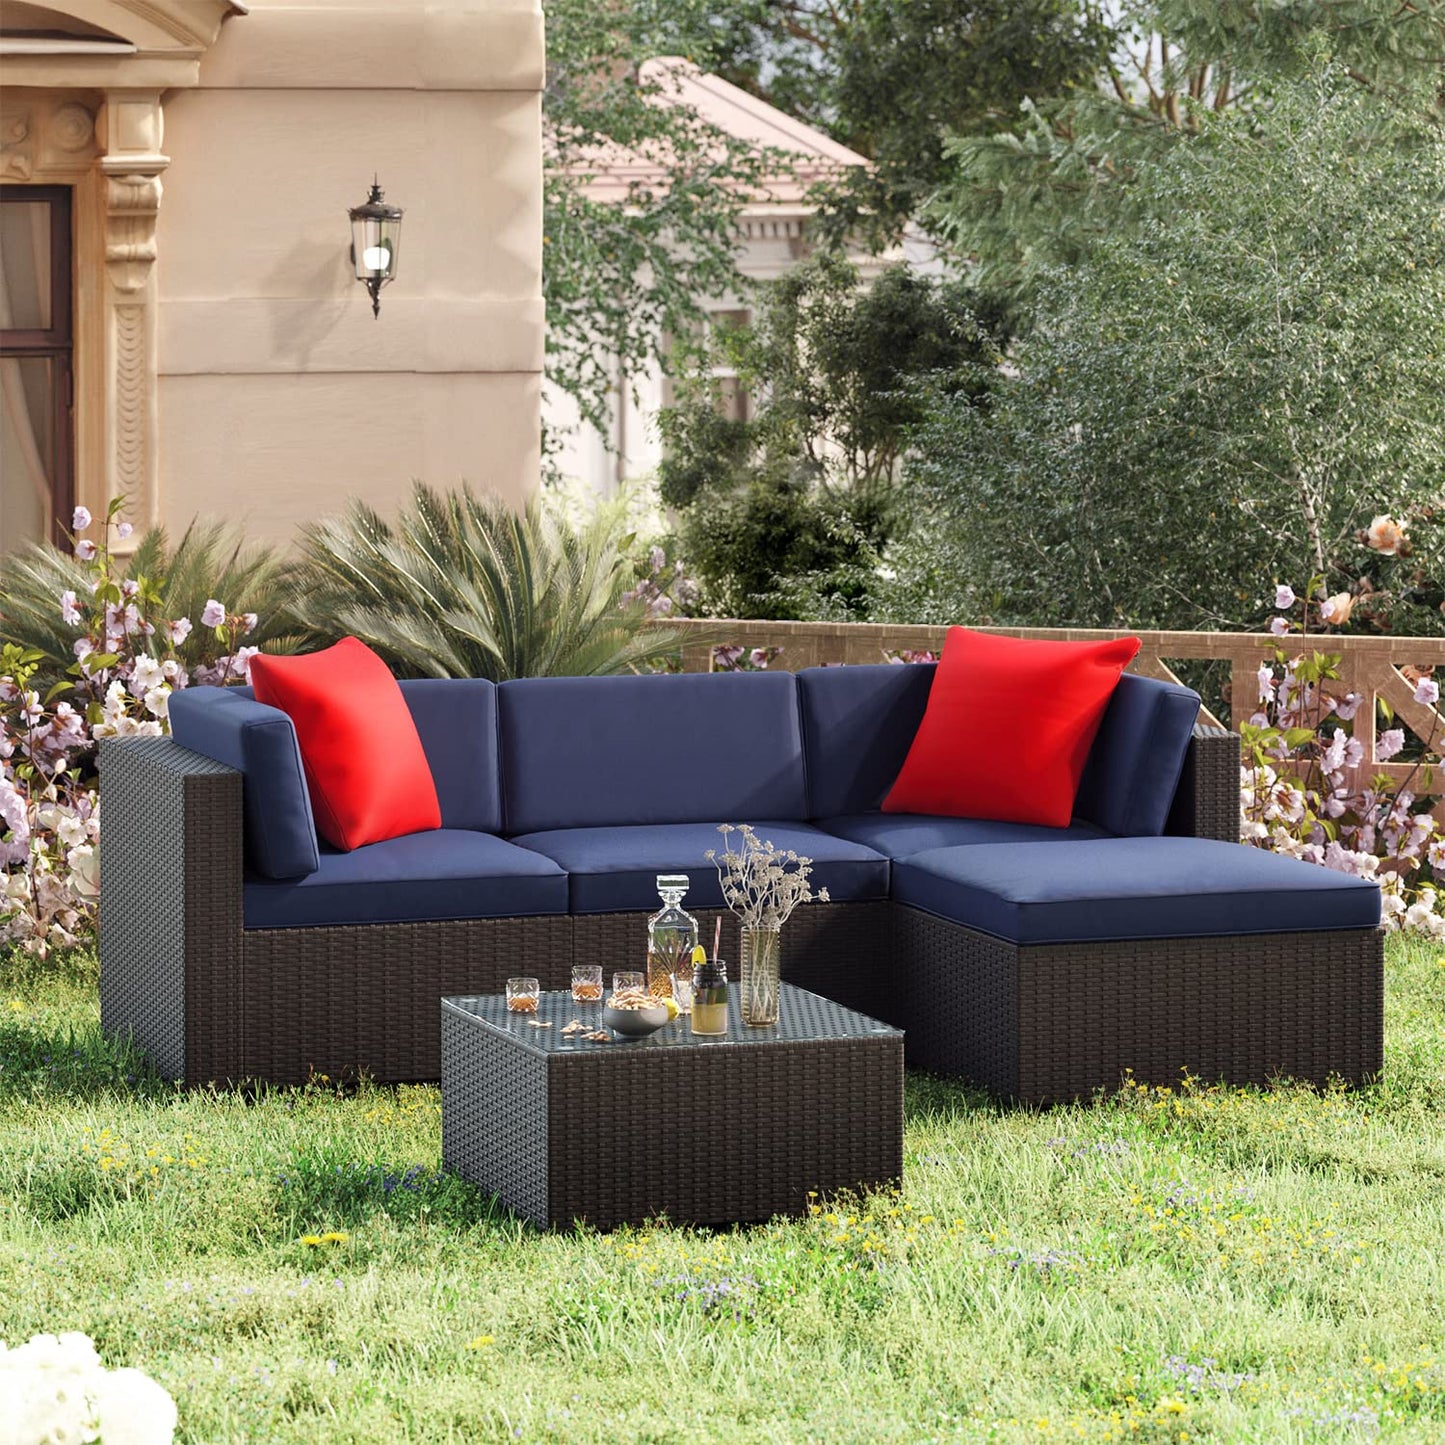 Greesum Patio Furniture Sets 5 Piece Outdoor Wicker Rattan Sectional Sofa with Cushions, Pillows & Glass Table, Dark Blue 5 Pieces